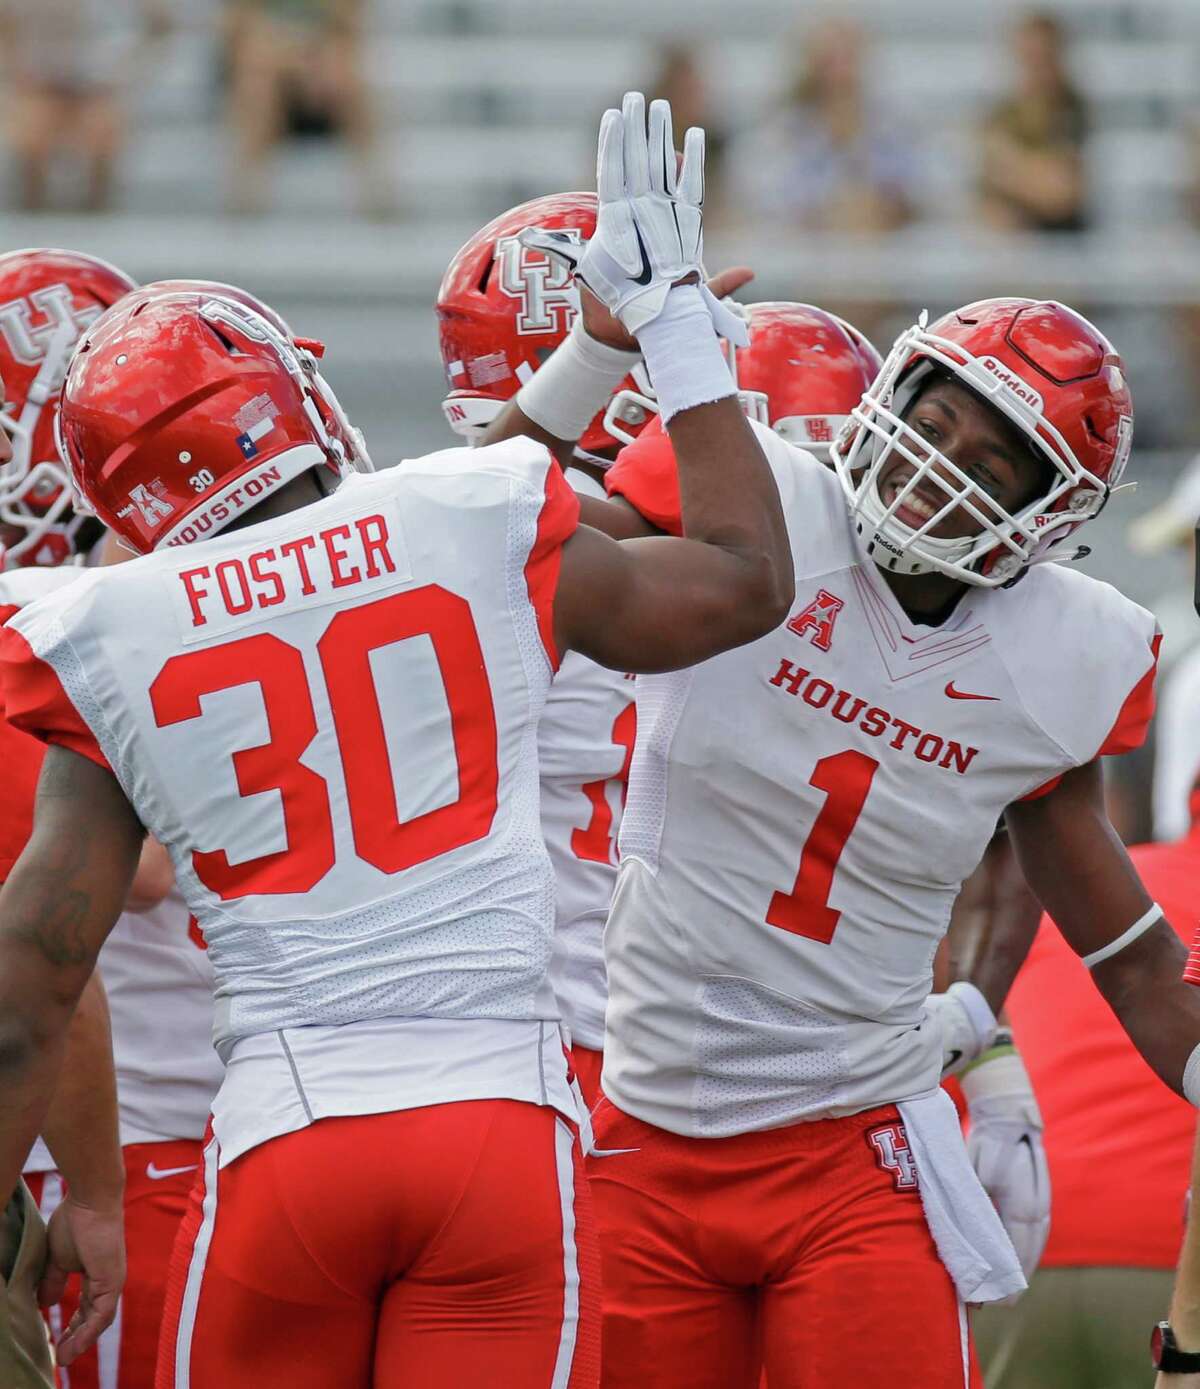 Houston quarterback Greg Ward Jr. (1) high fives teammate safety Earl Foster (30) during warm ups before an NCAA college football game against Central Florida, Saturday, Oct. 24, 2015, in Orlando, Fla. (AP Photo/John Raoux)